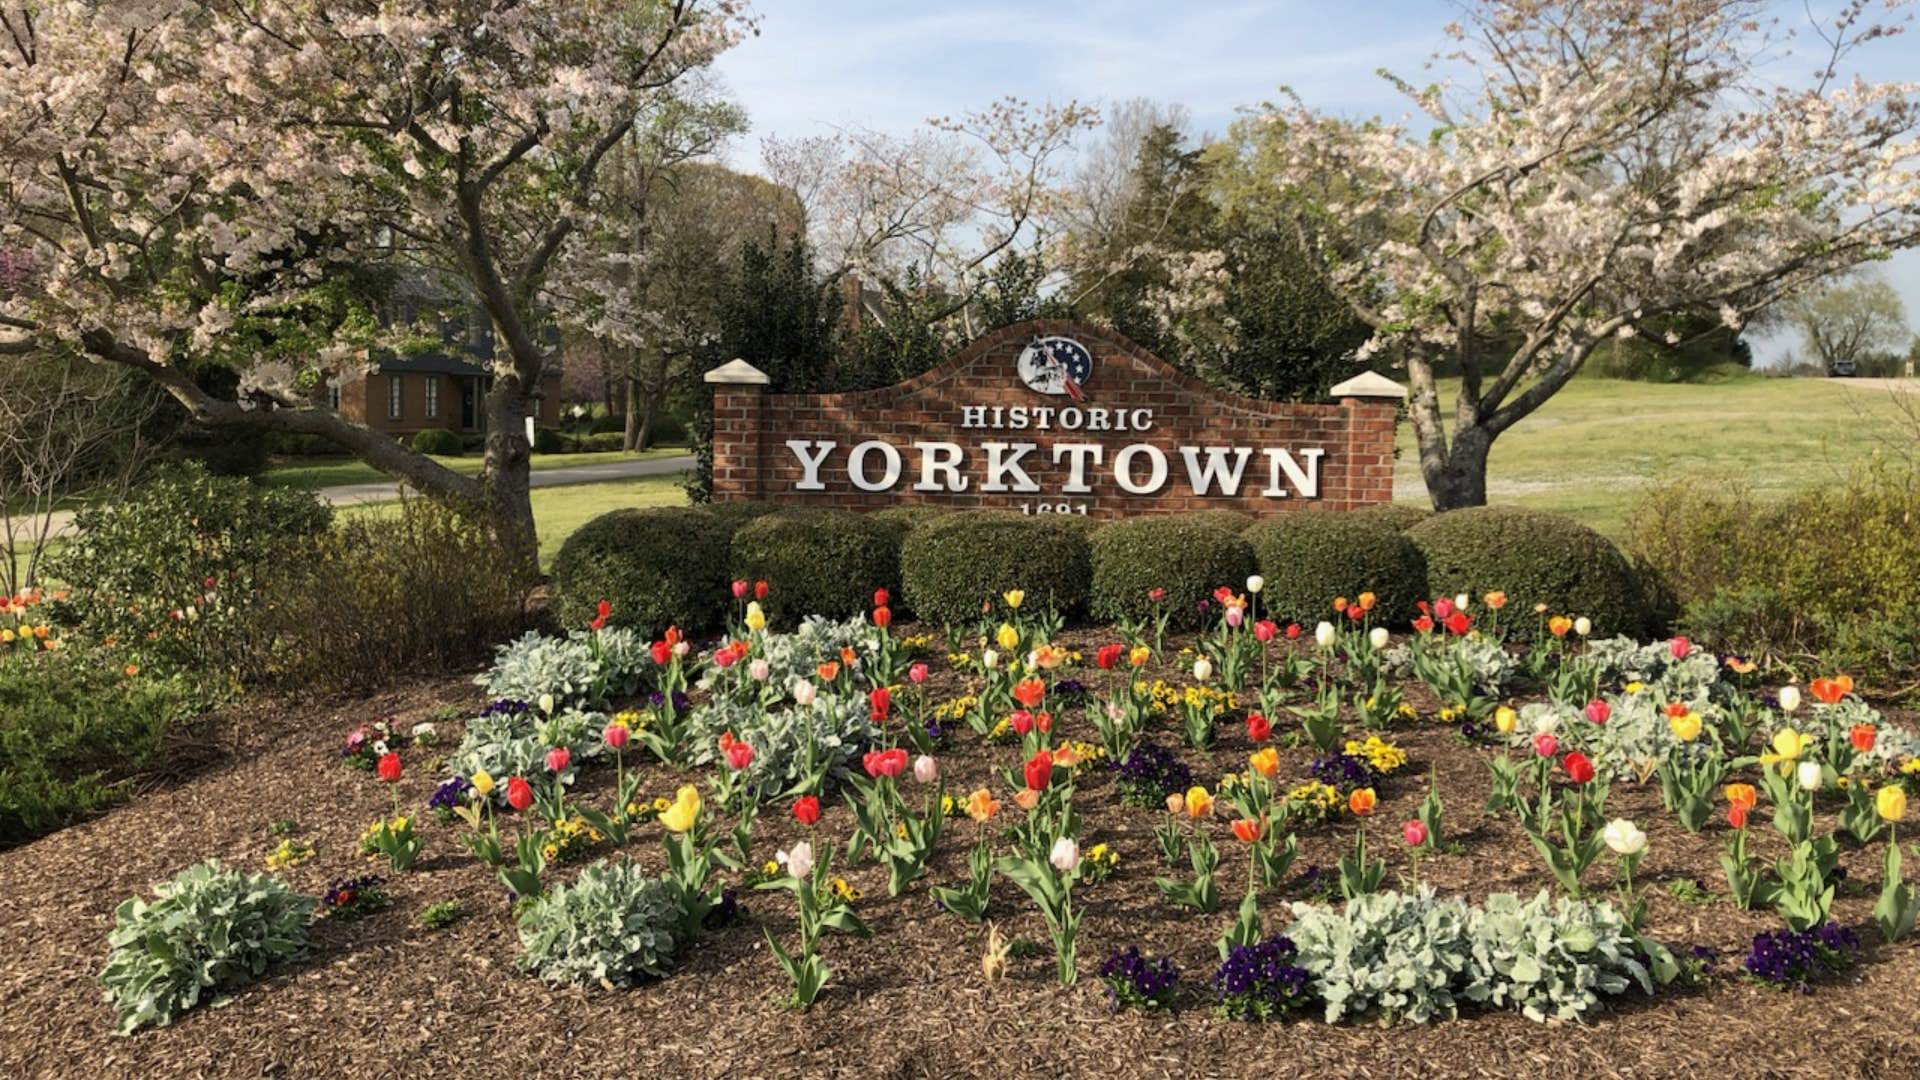 Brick sign that says Historic Yorktown surrounded by green bushes, flowers, Cherry Blossom trees, and green grass